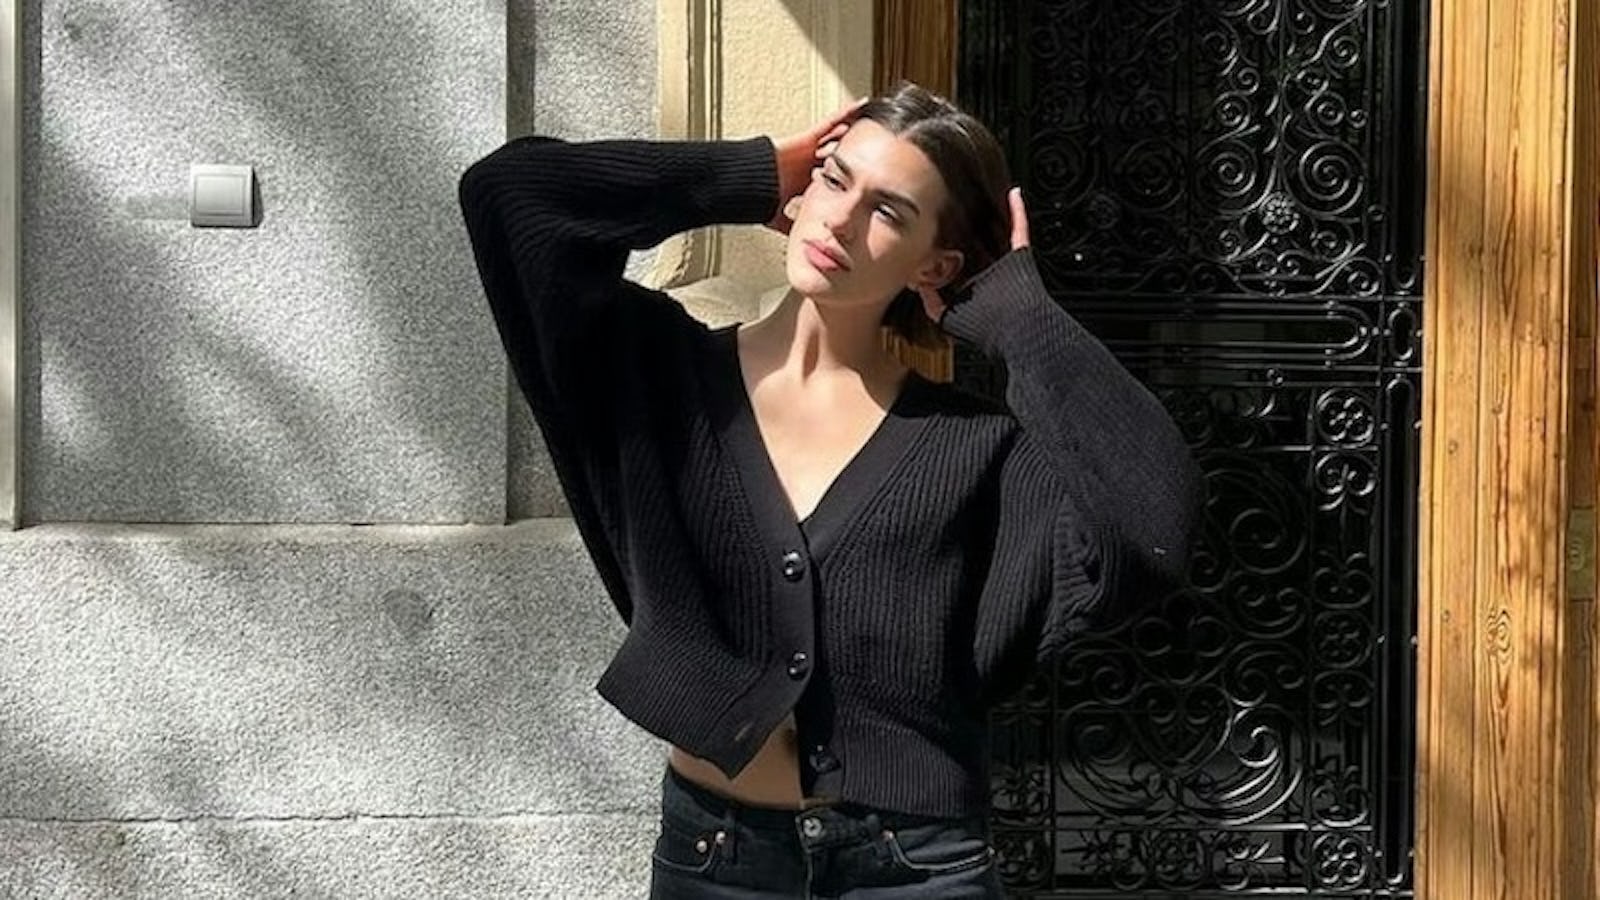 @valeriaminghelli wears cropped cardigan, black denim shorts, and tall black boots